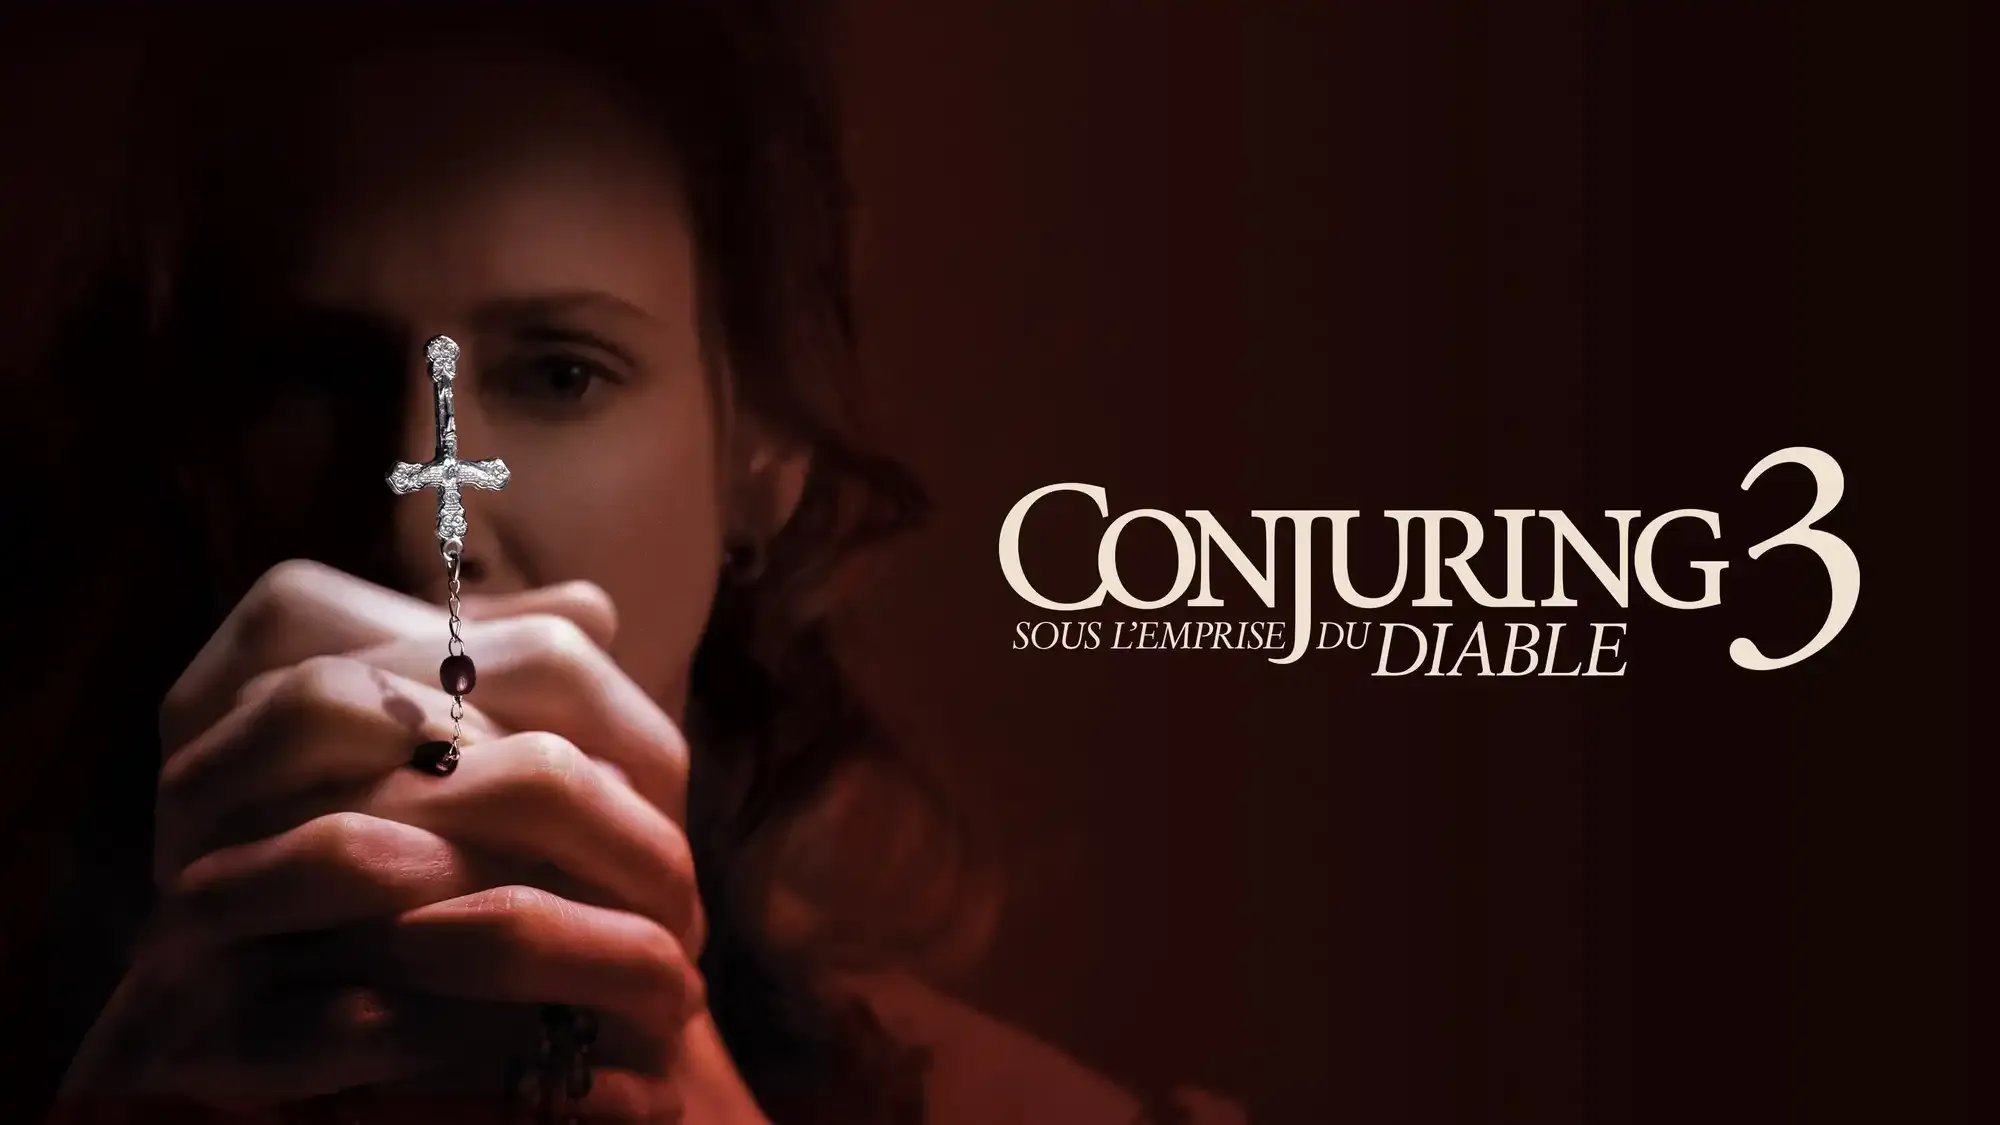 The Conjuring: The Devil Made Me Do It movie review